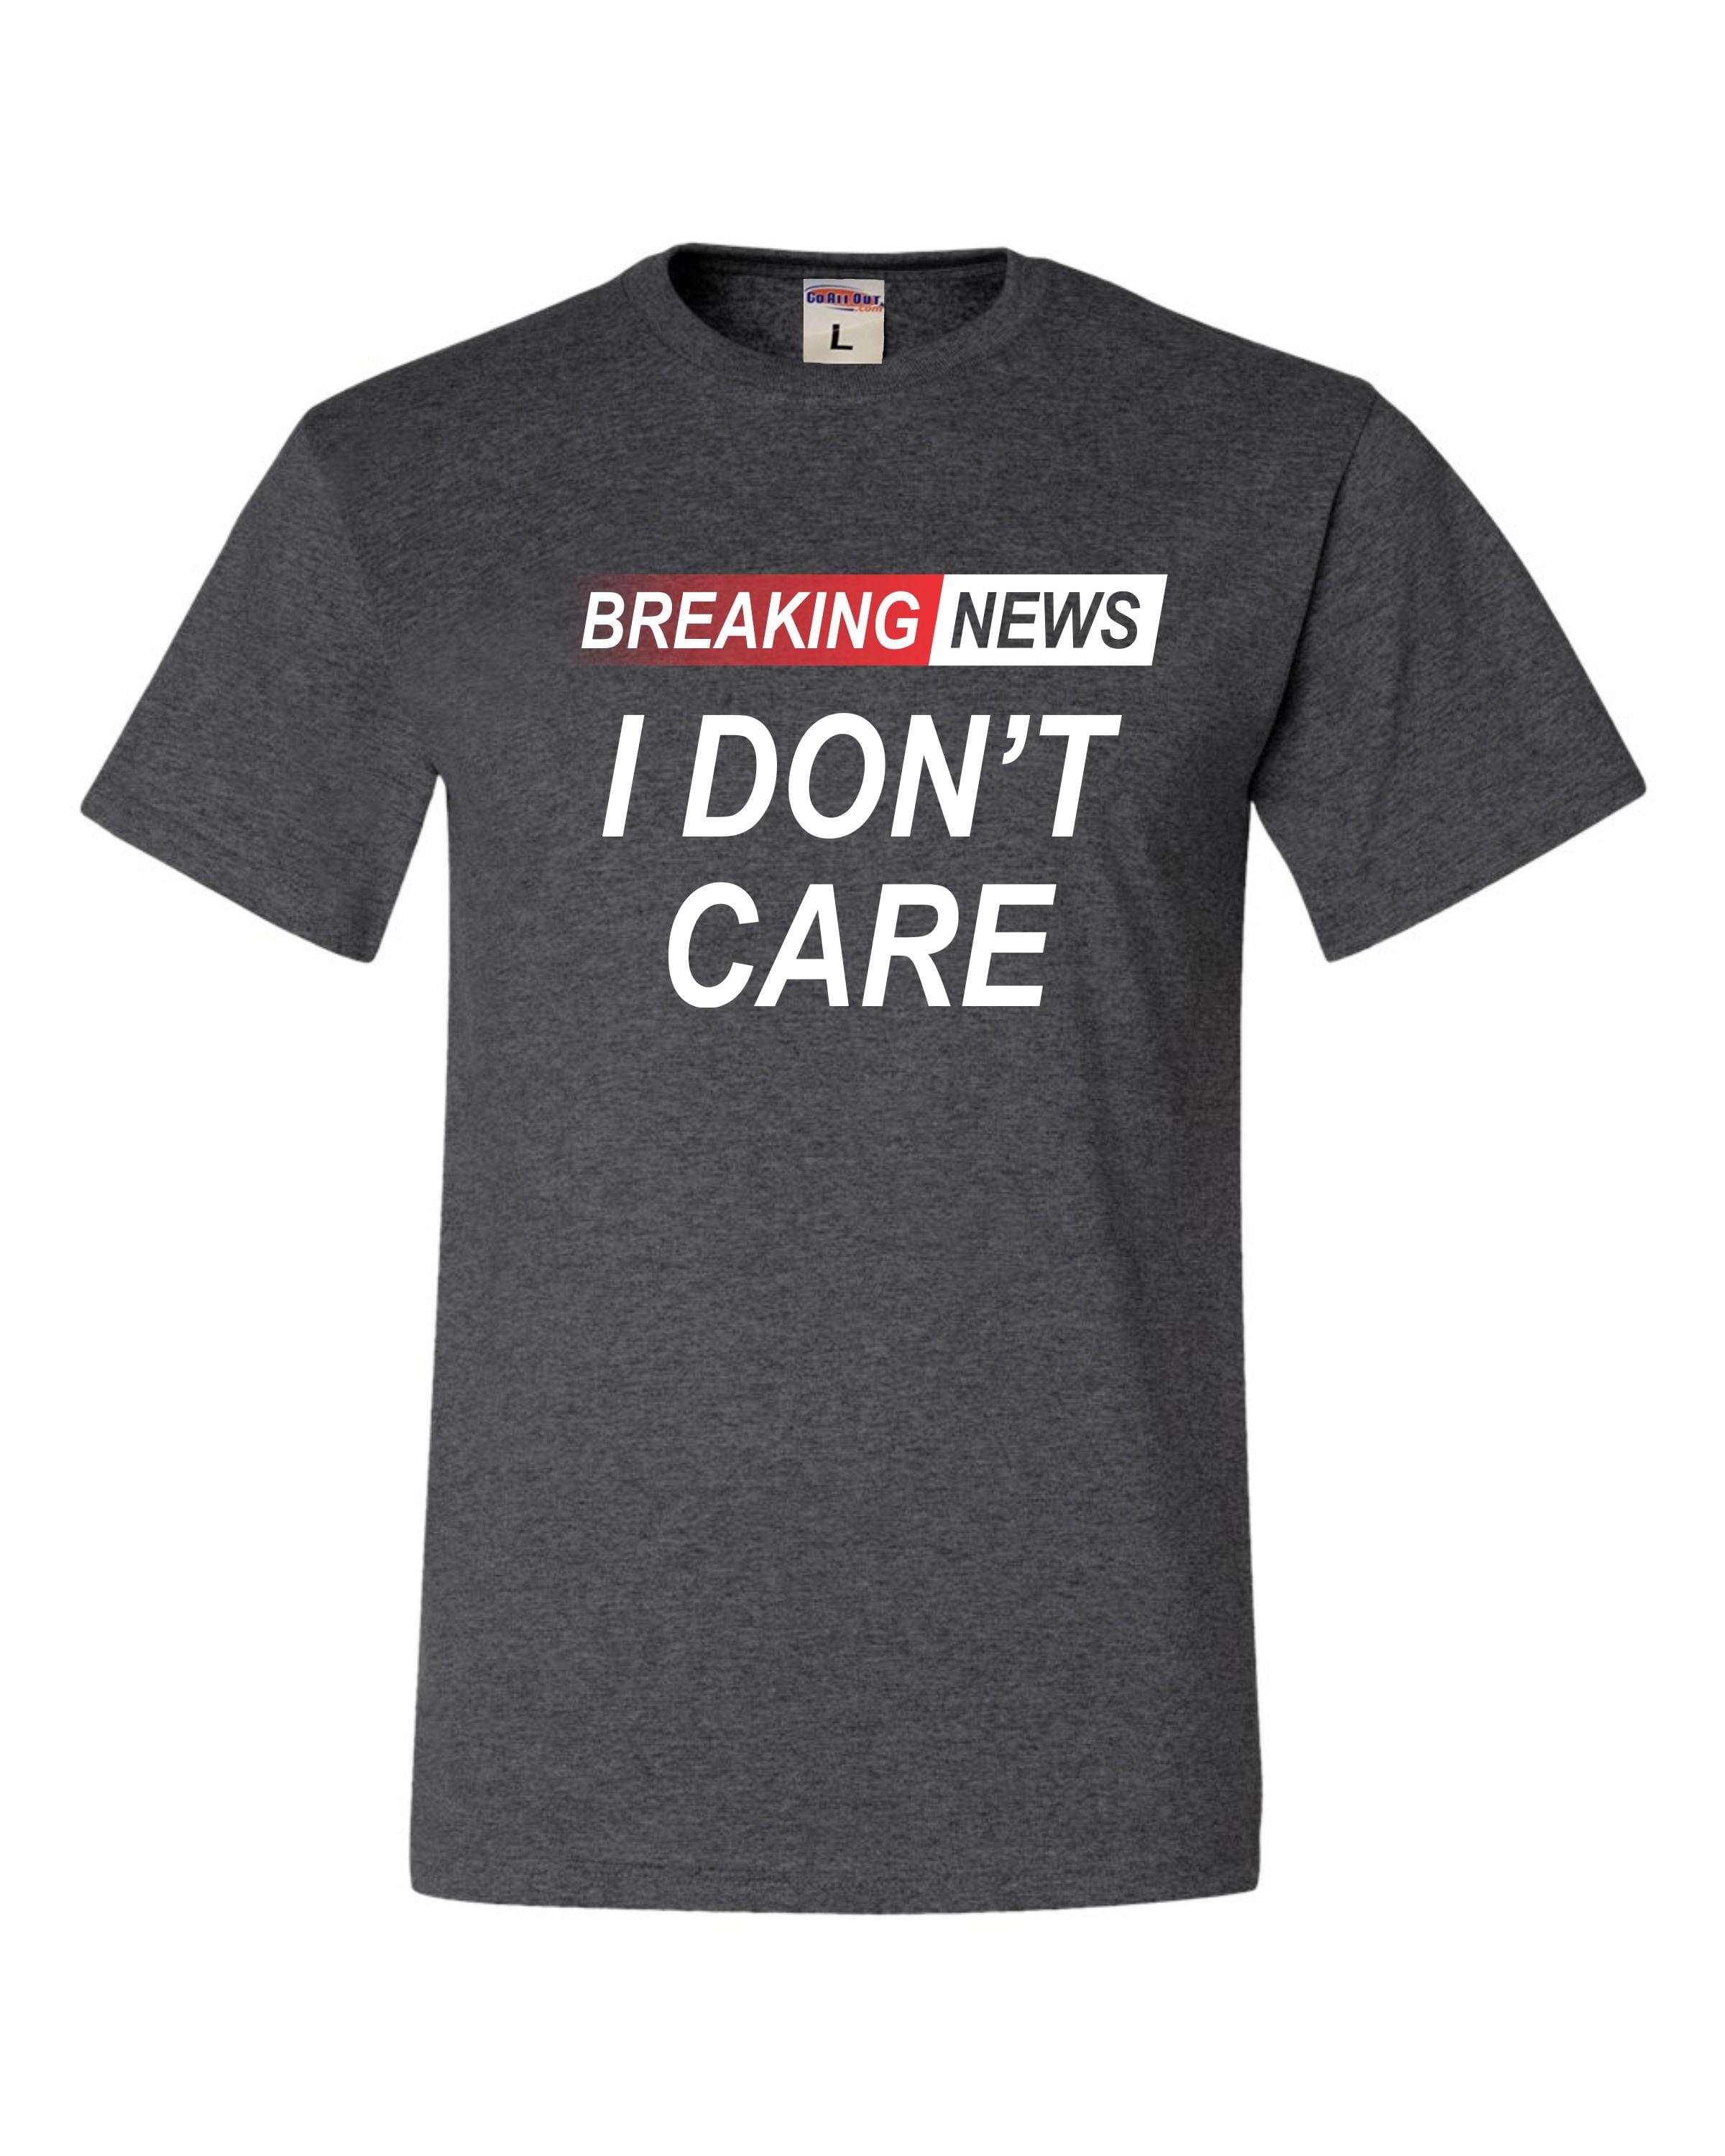 Go All Out Breaking News I Don't Care Funny Sarcastic Humor T